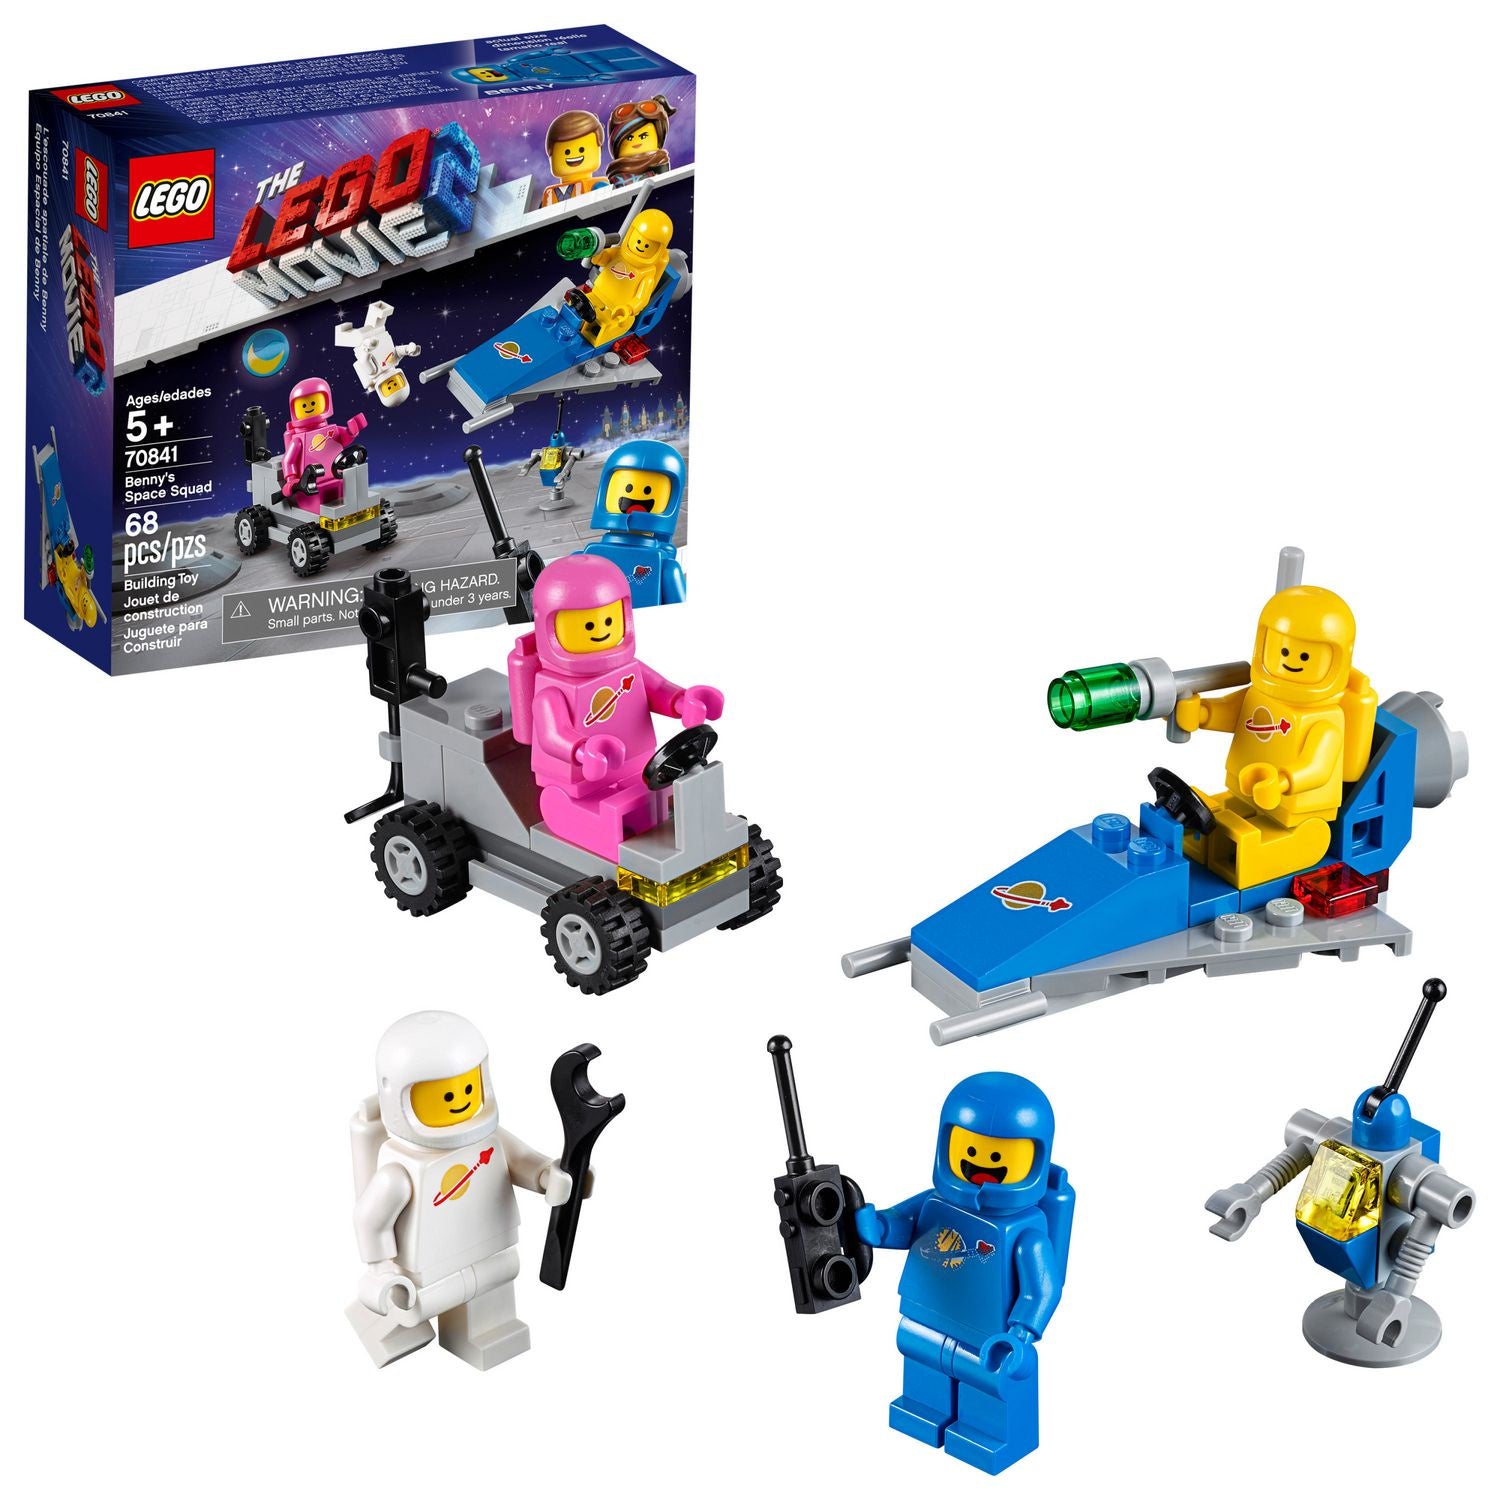 The Lego Movie 2: Benny's Space Squad 70841